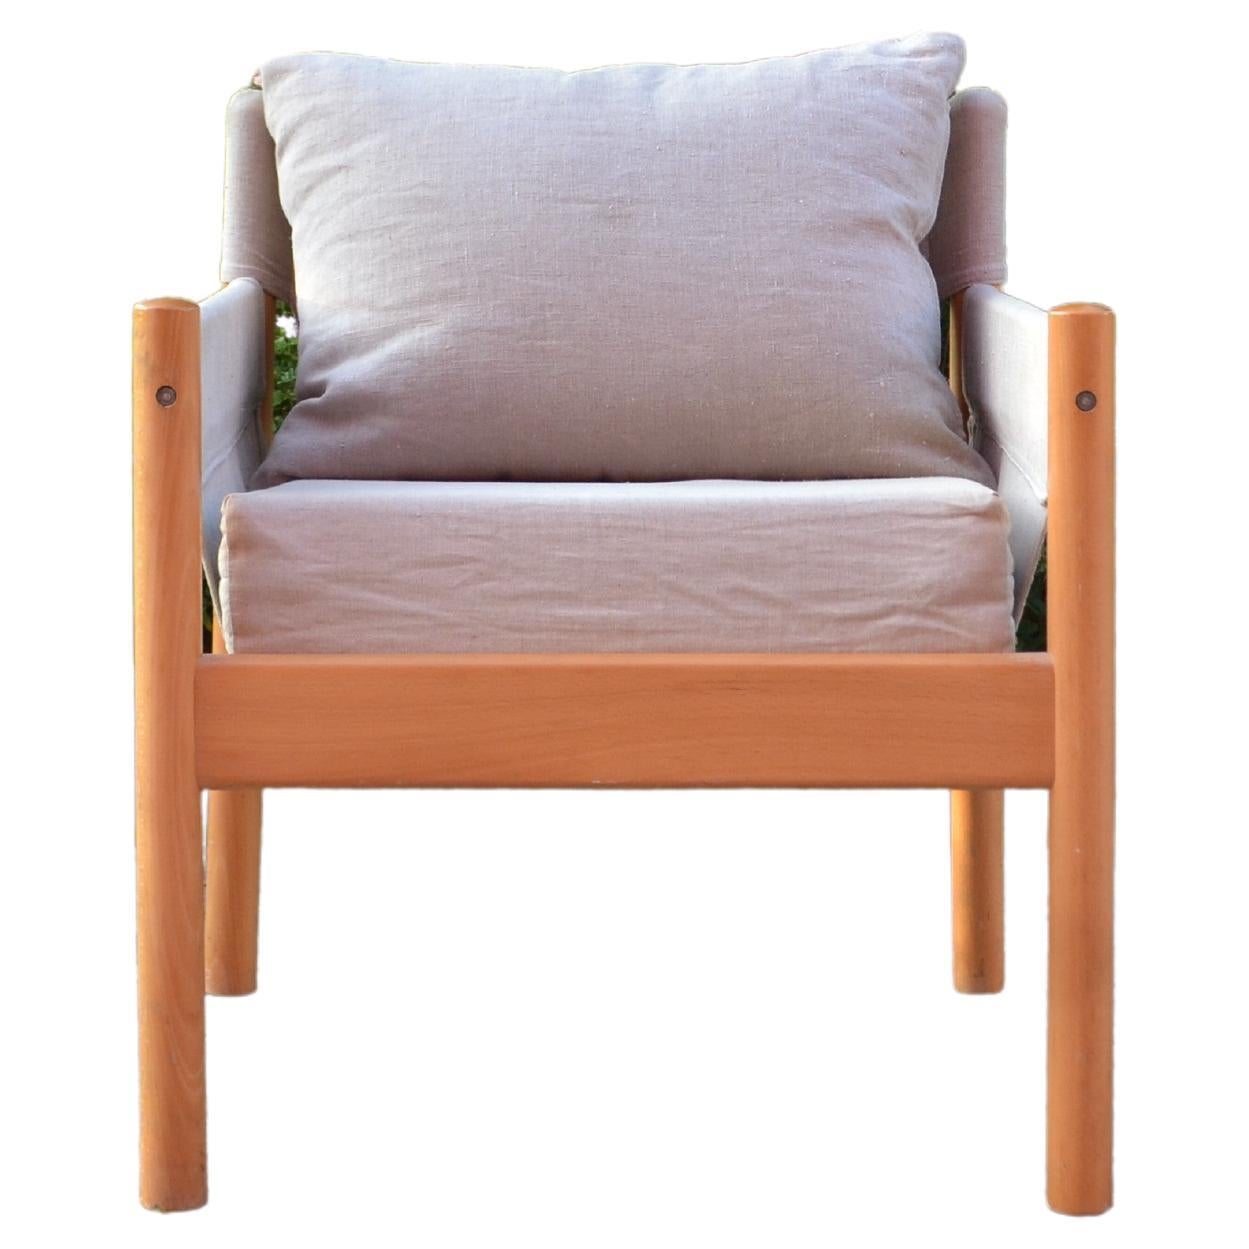 This IKEA Classic Vintage lounge chair was designed 1979 by Christer Blomquist.
It has a solid frame made of beech wood.
The Seat is well designed in canvas in a thin Sling shape with a thick seating pad and soft back cushion.
Best Vintage